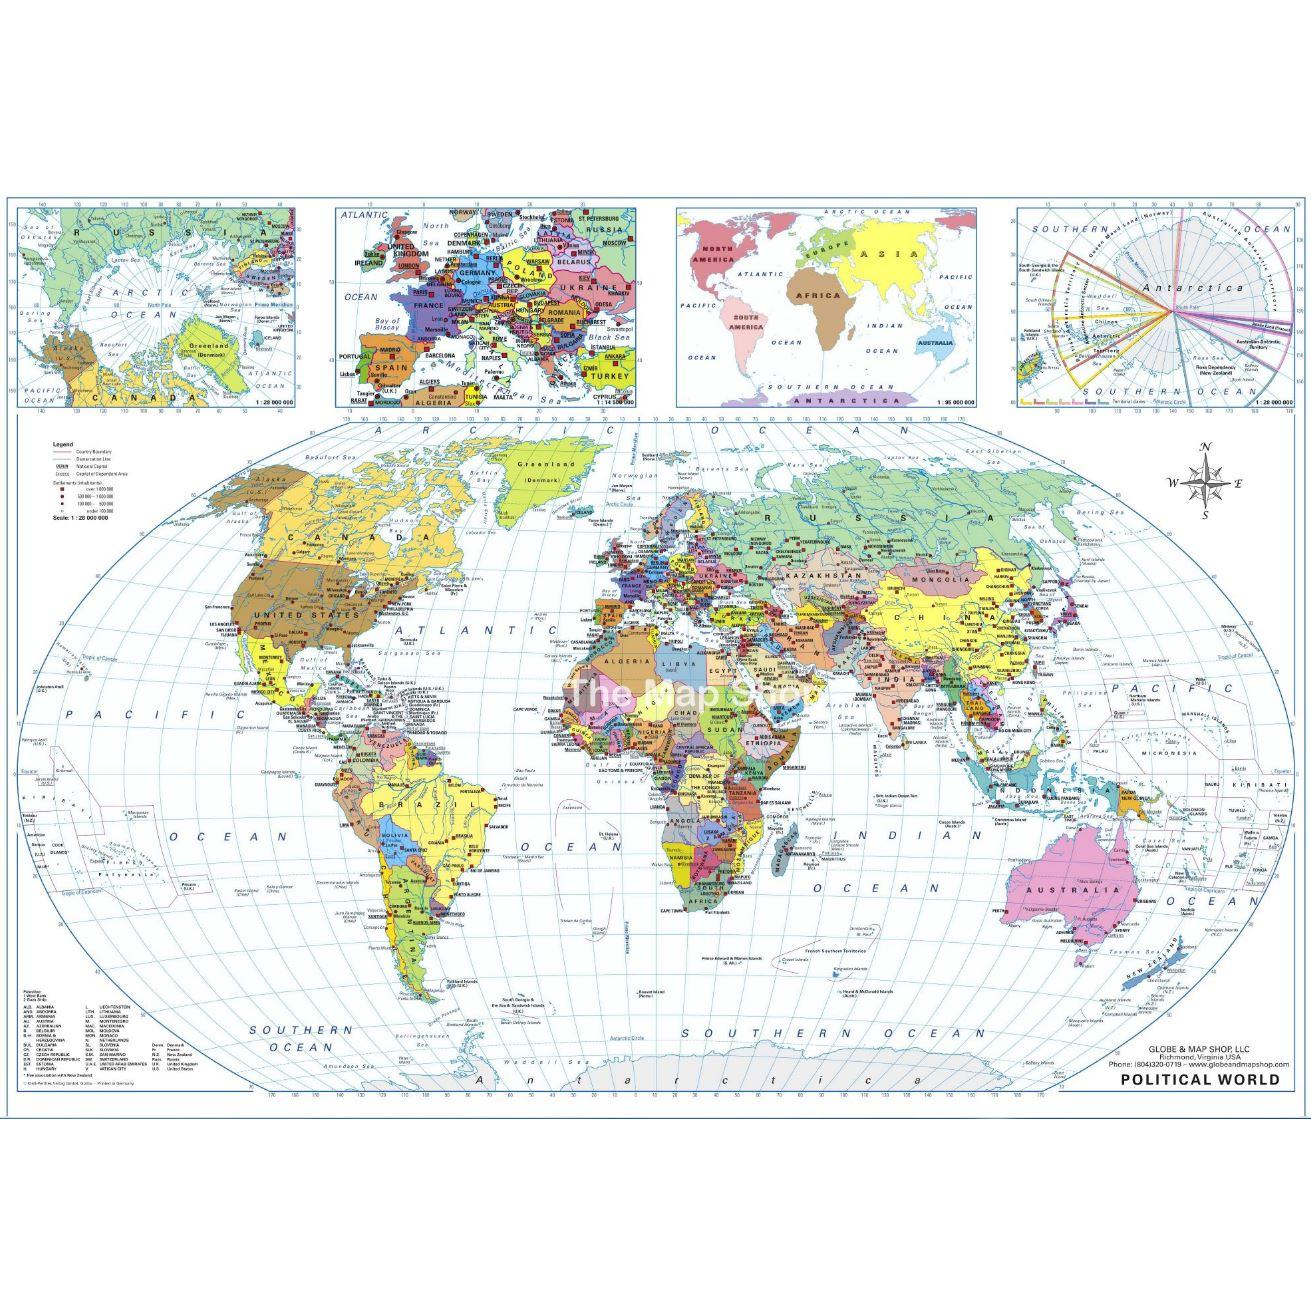 15652 NEW Ravensburger Political World Map 1000 pieces jigsaw puzzle 